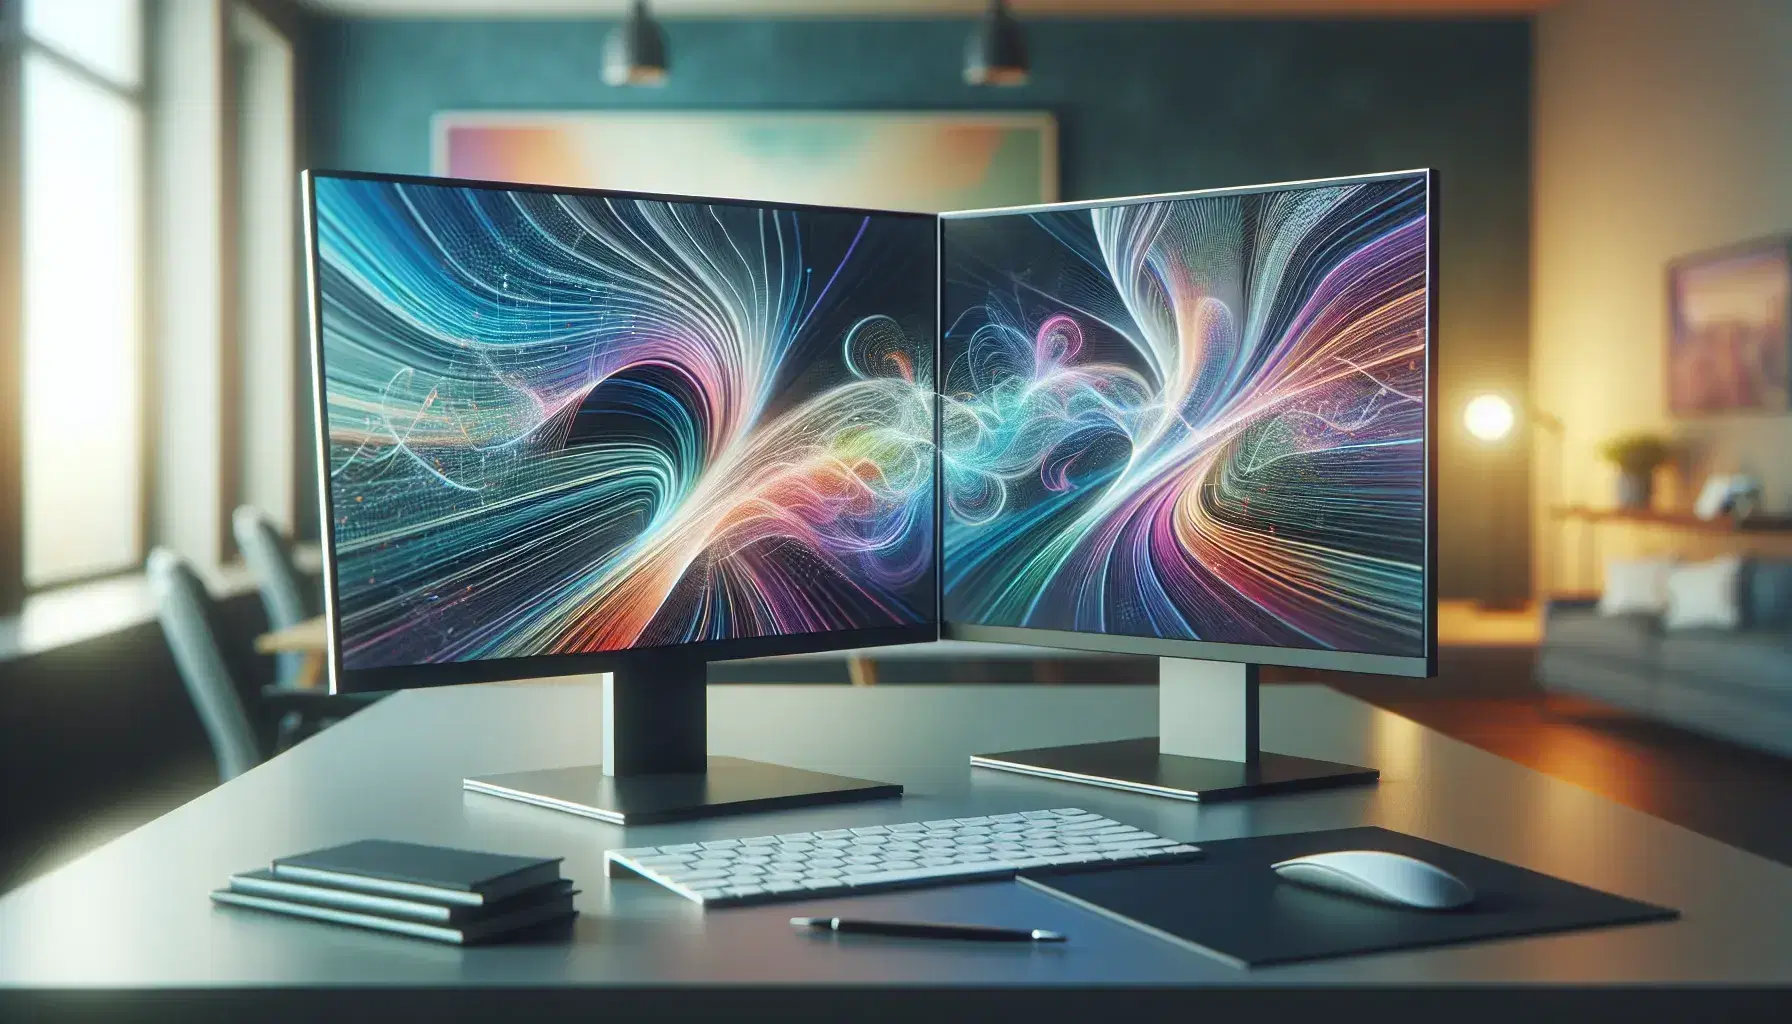 Minimalist dual-monitor computer setup on a clean desk, displaying vibrant abstract visuals with blues, greens, purples, and oranges, in a softly lit office environment.